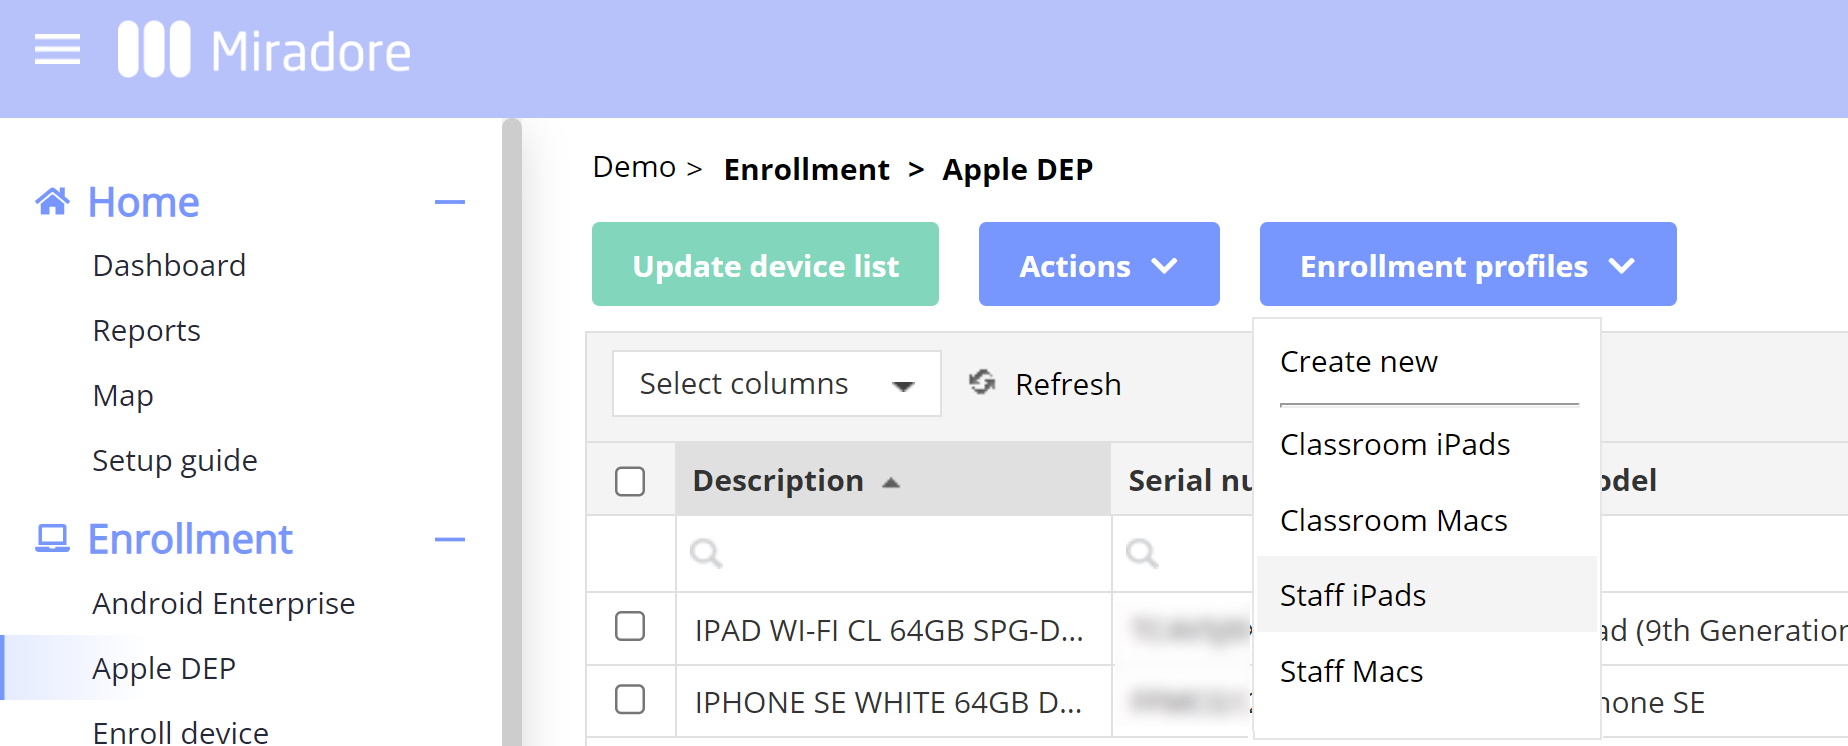 You can create, edit, assign and unassign enrollment profiles for Apple's Automated Device Enrollment on the Apple DEP page.